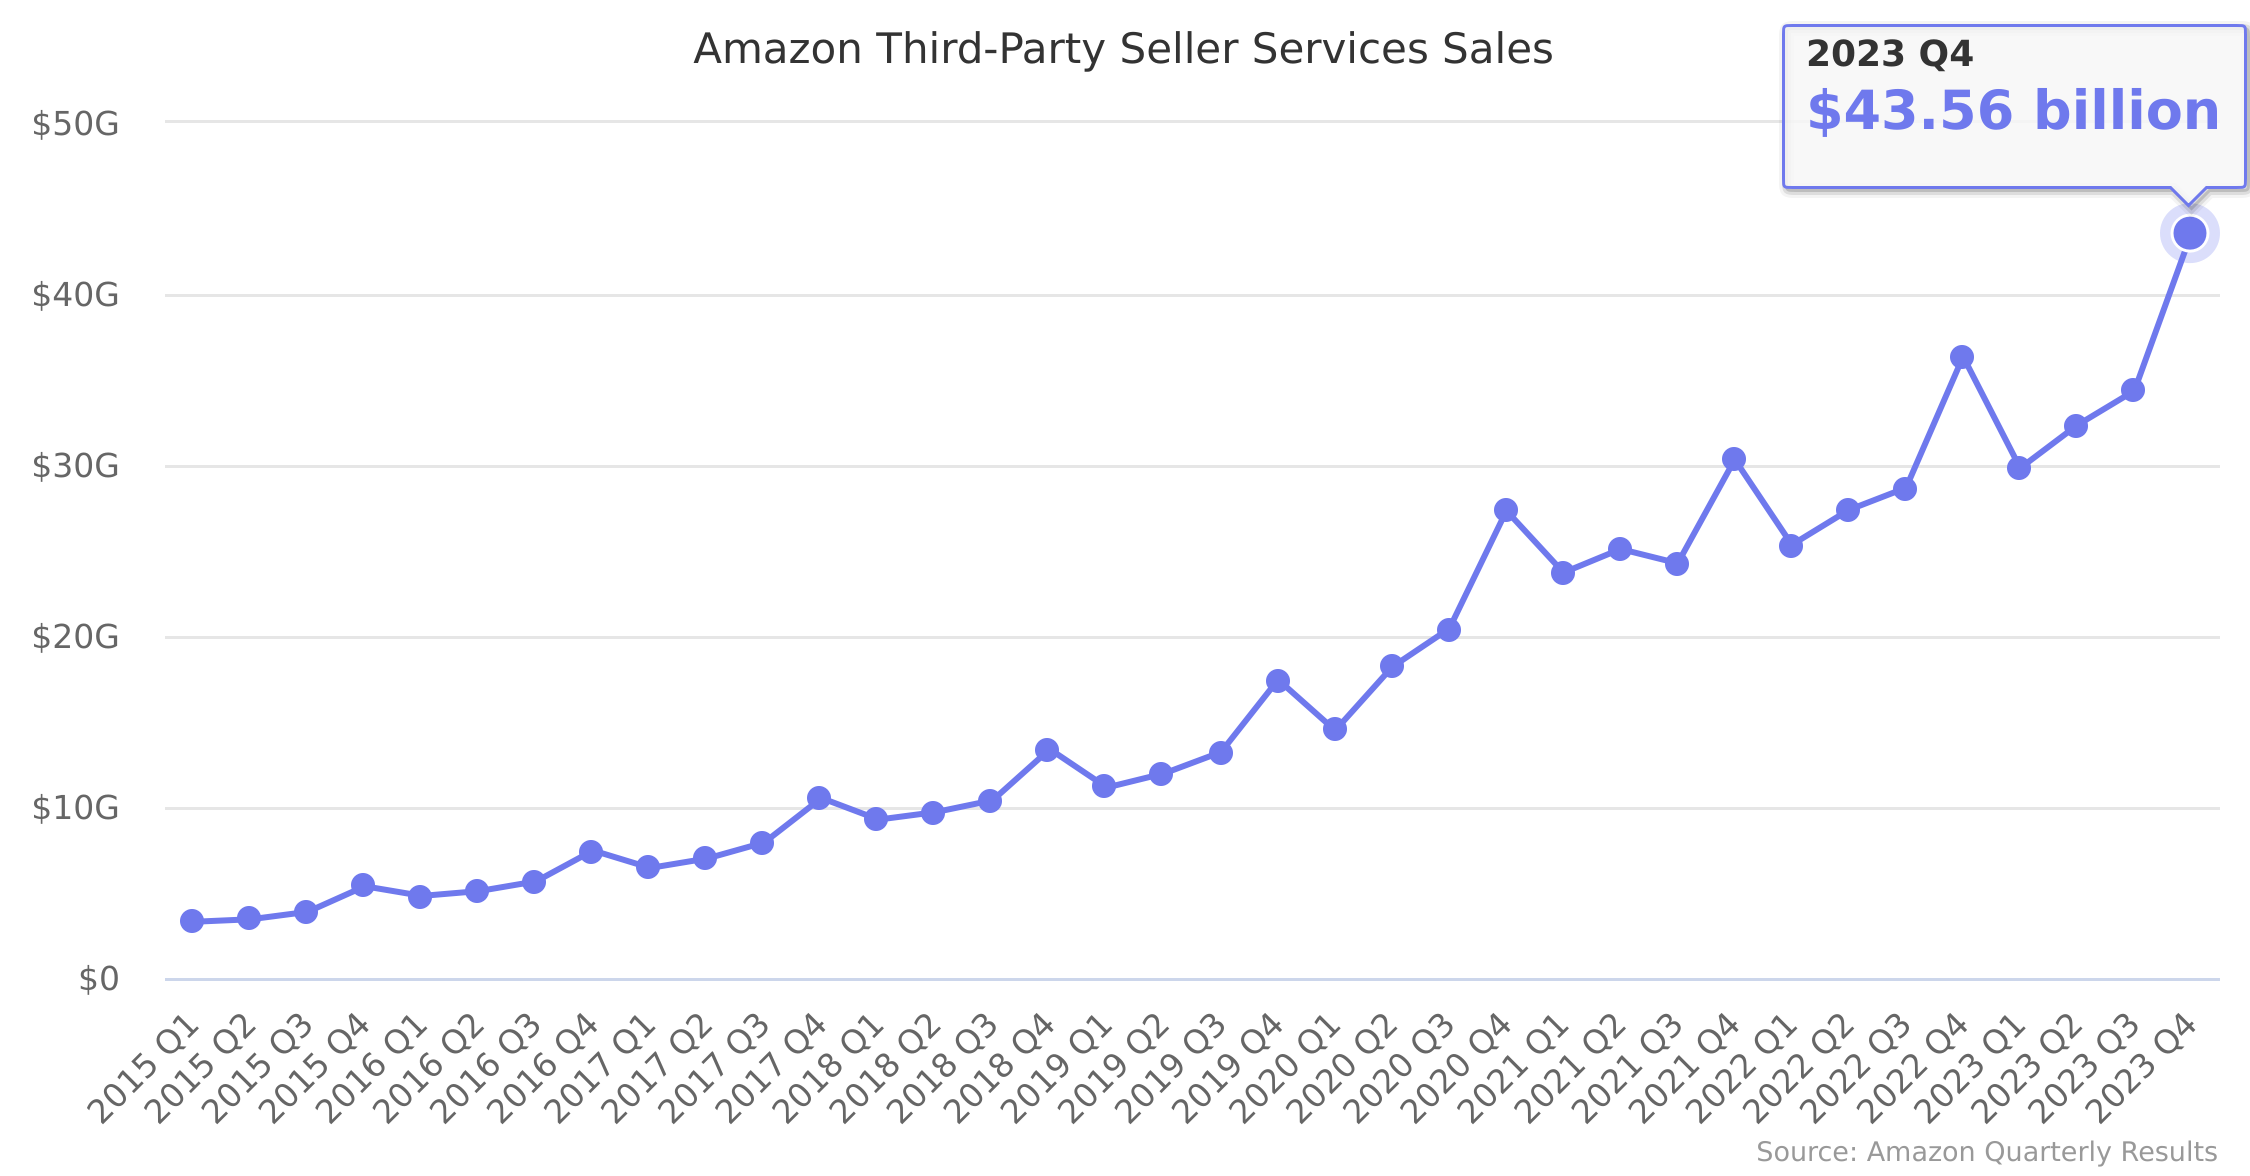 Amazon Third-Party Seller Services Sales 2015-2023